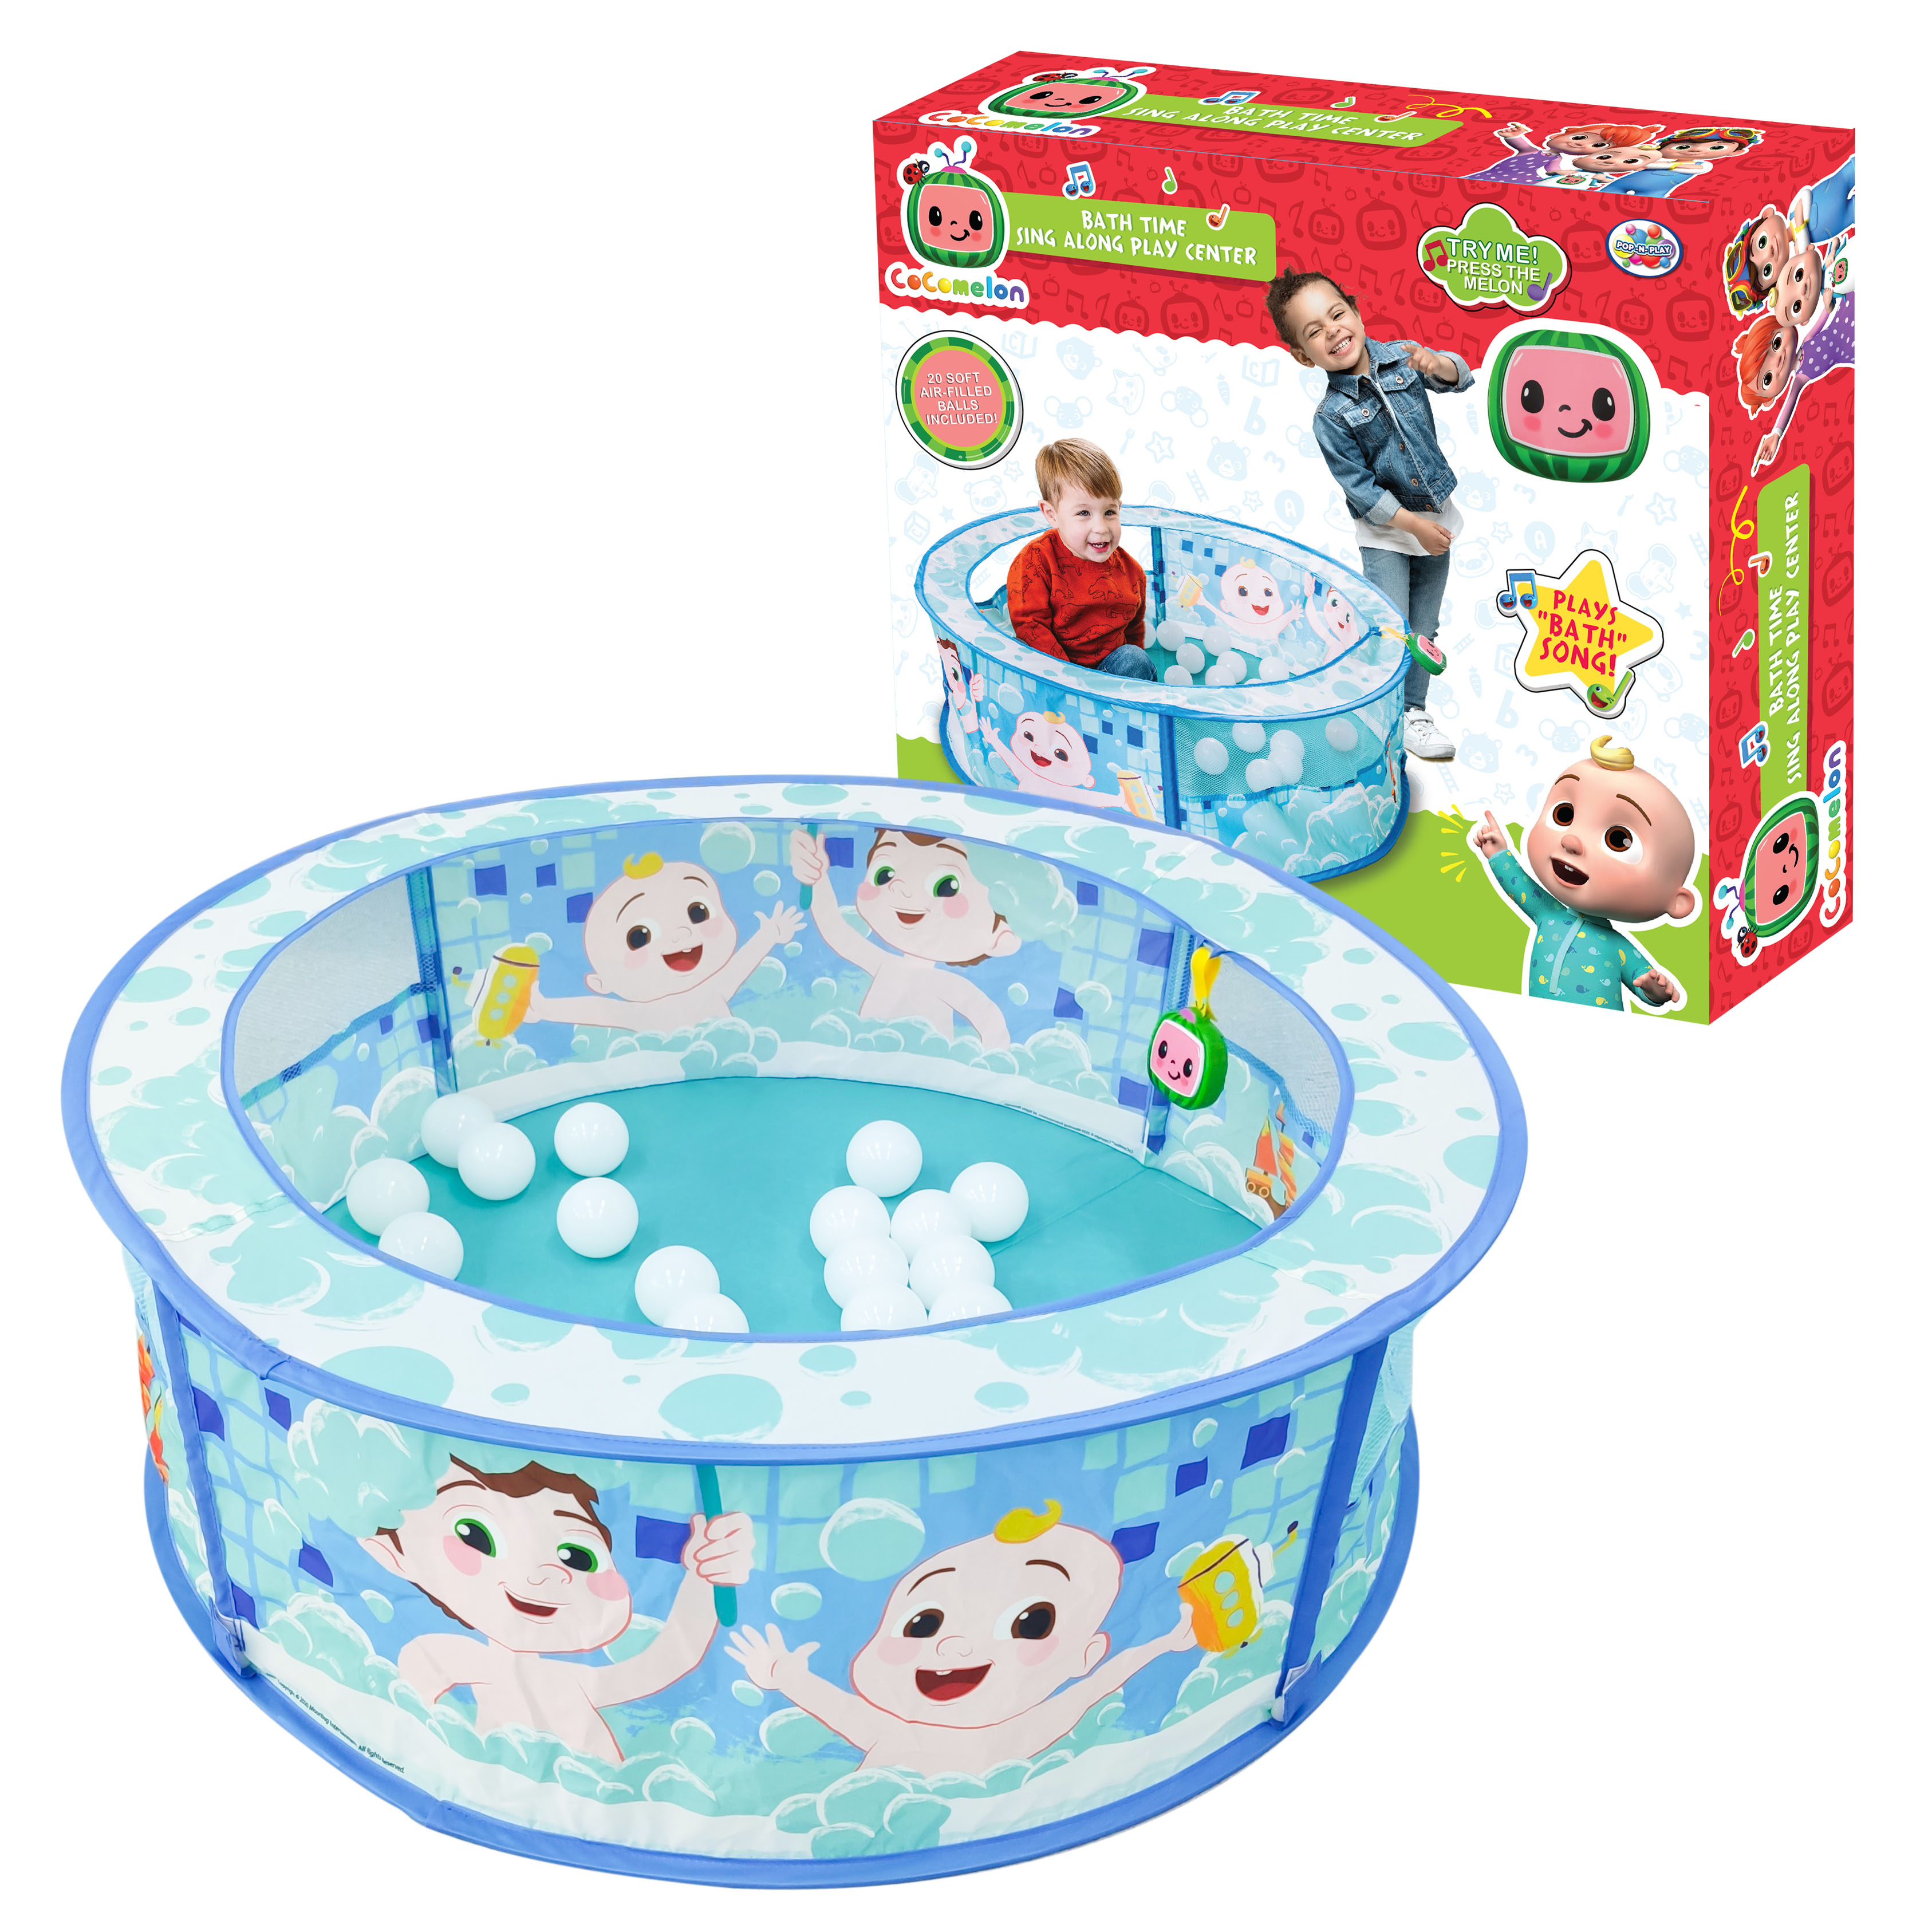 CoComelon Bath Time Sing Along Play Center, Pop Up Ball Pit Tent with 20 Play Balls and Music, Children Ages 3+ - image 1 of 6